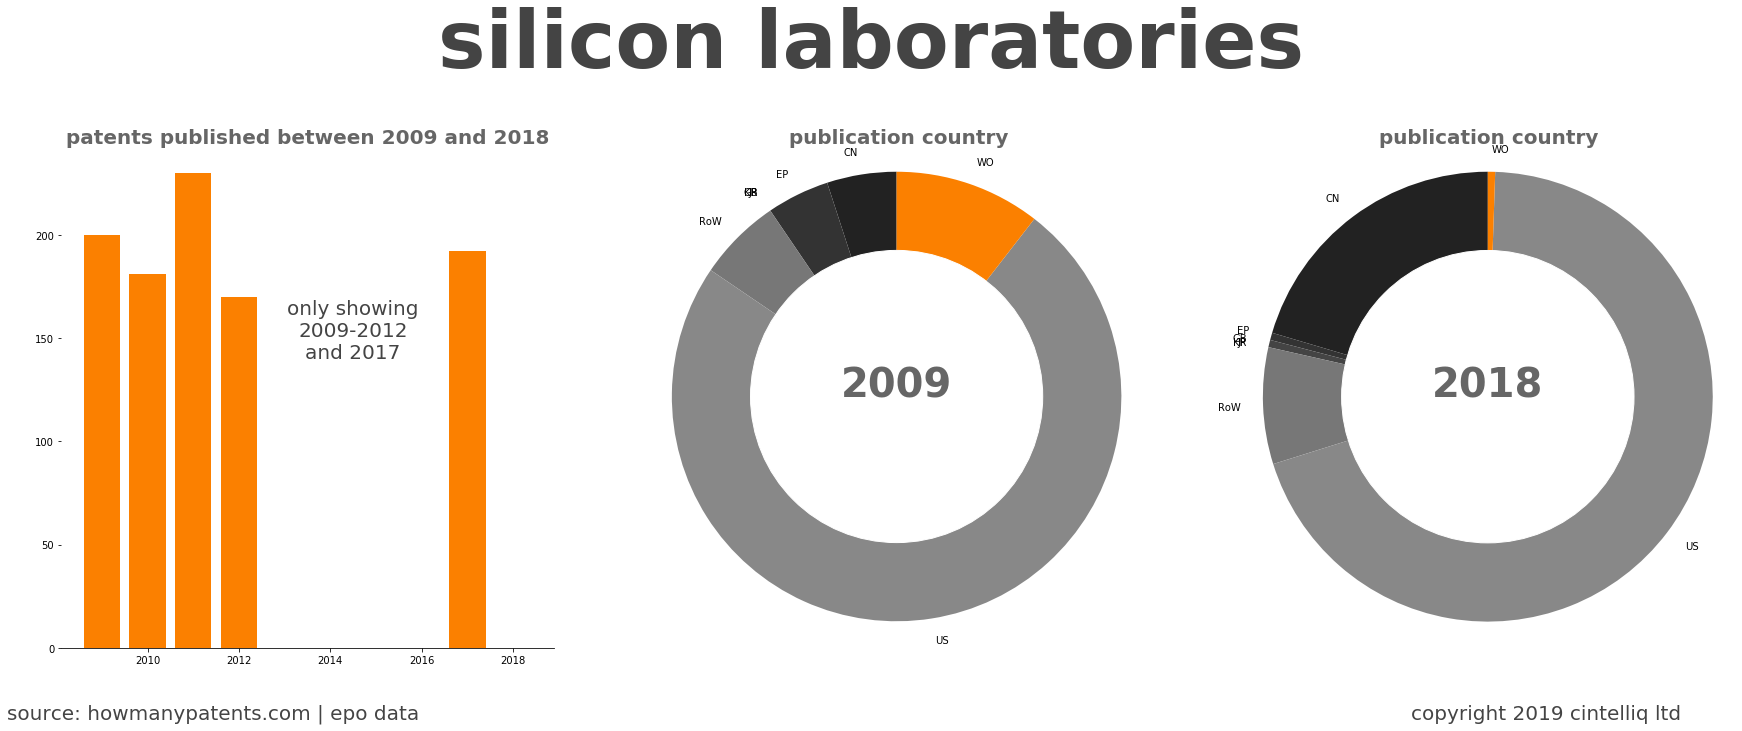 summary of patents for Silicon Laboratories